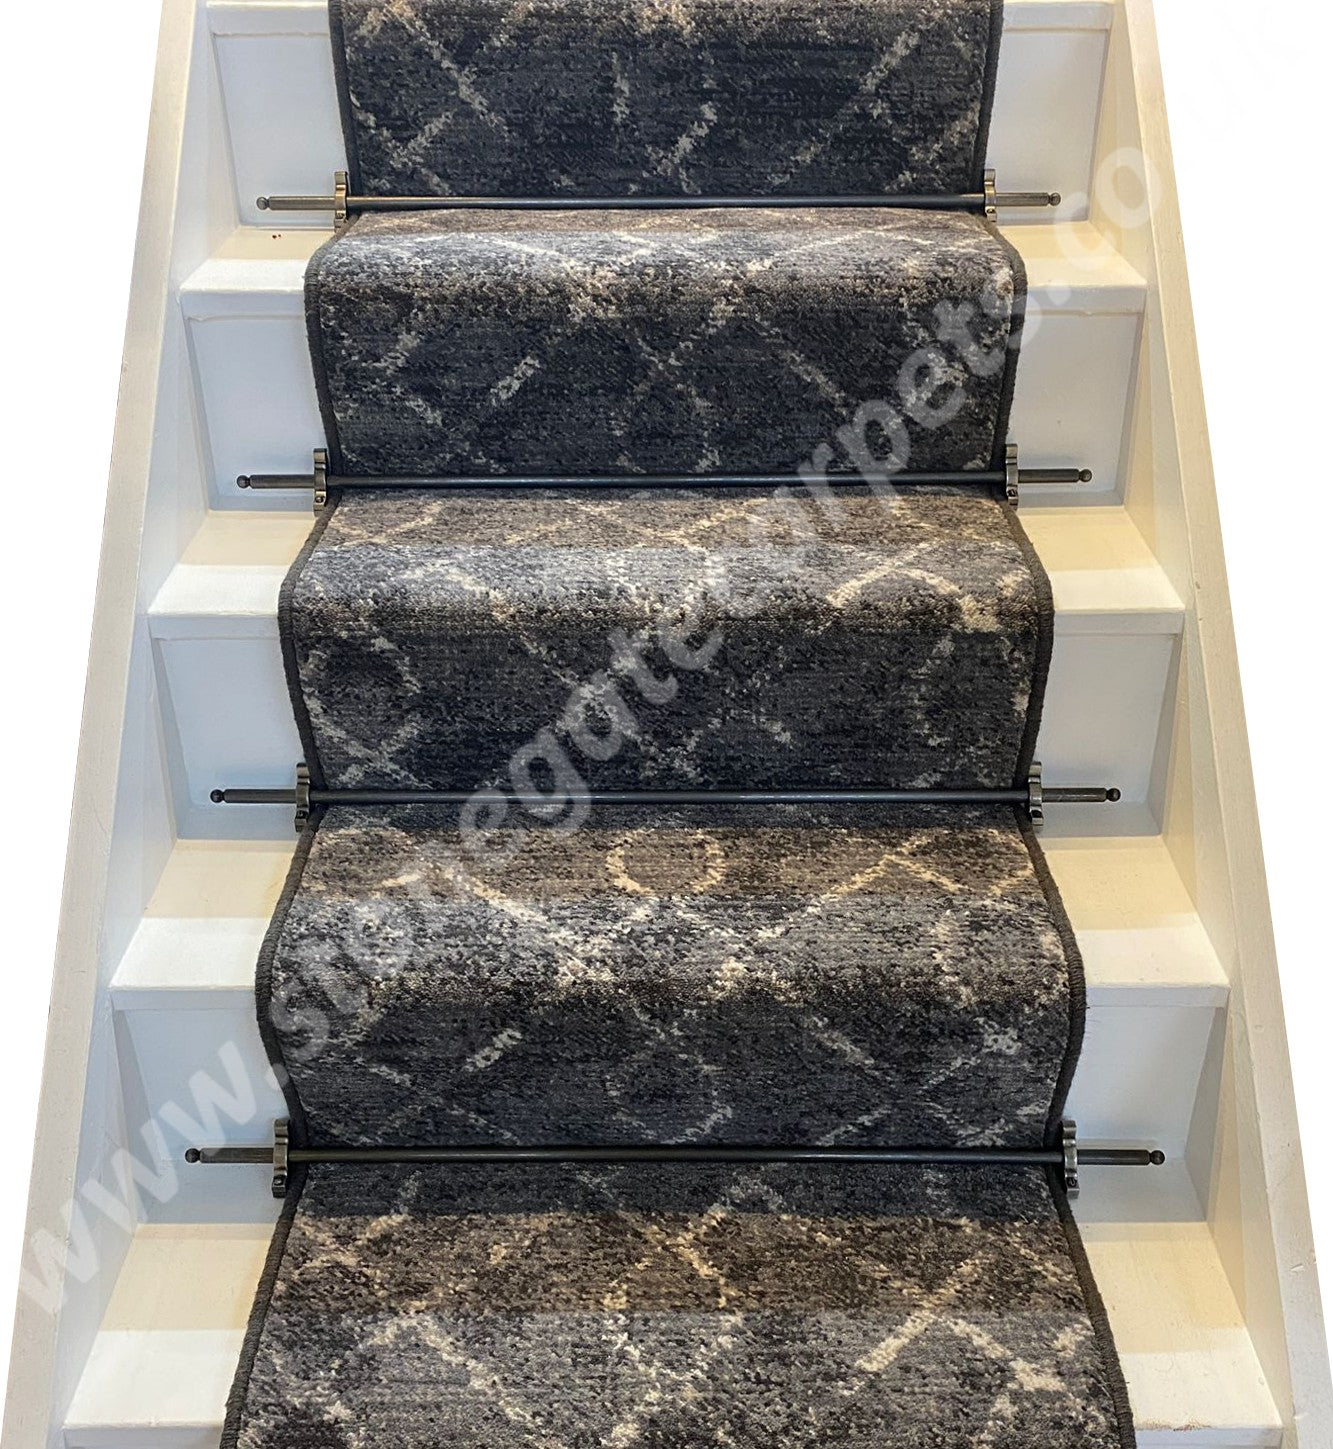 Ulster Carpets Vescent Nexus Onyx Stair Runner with choice of adding bespoke border or overlocking colour (per linear metre)